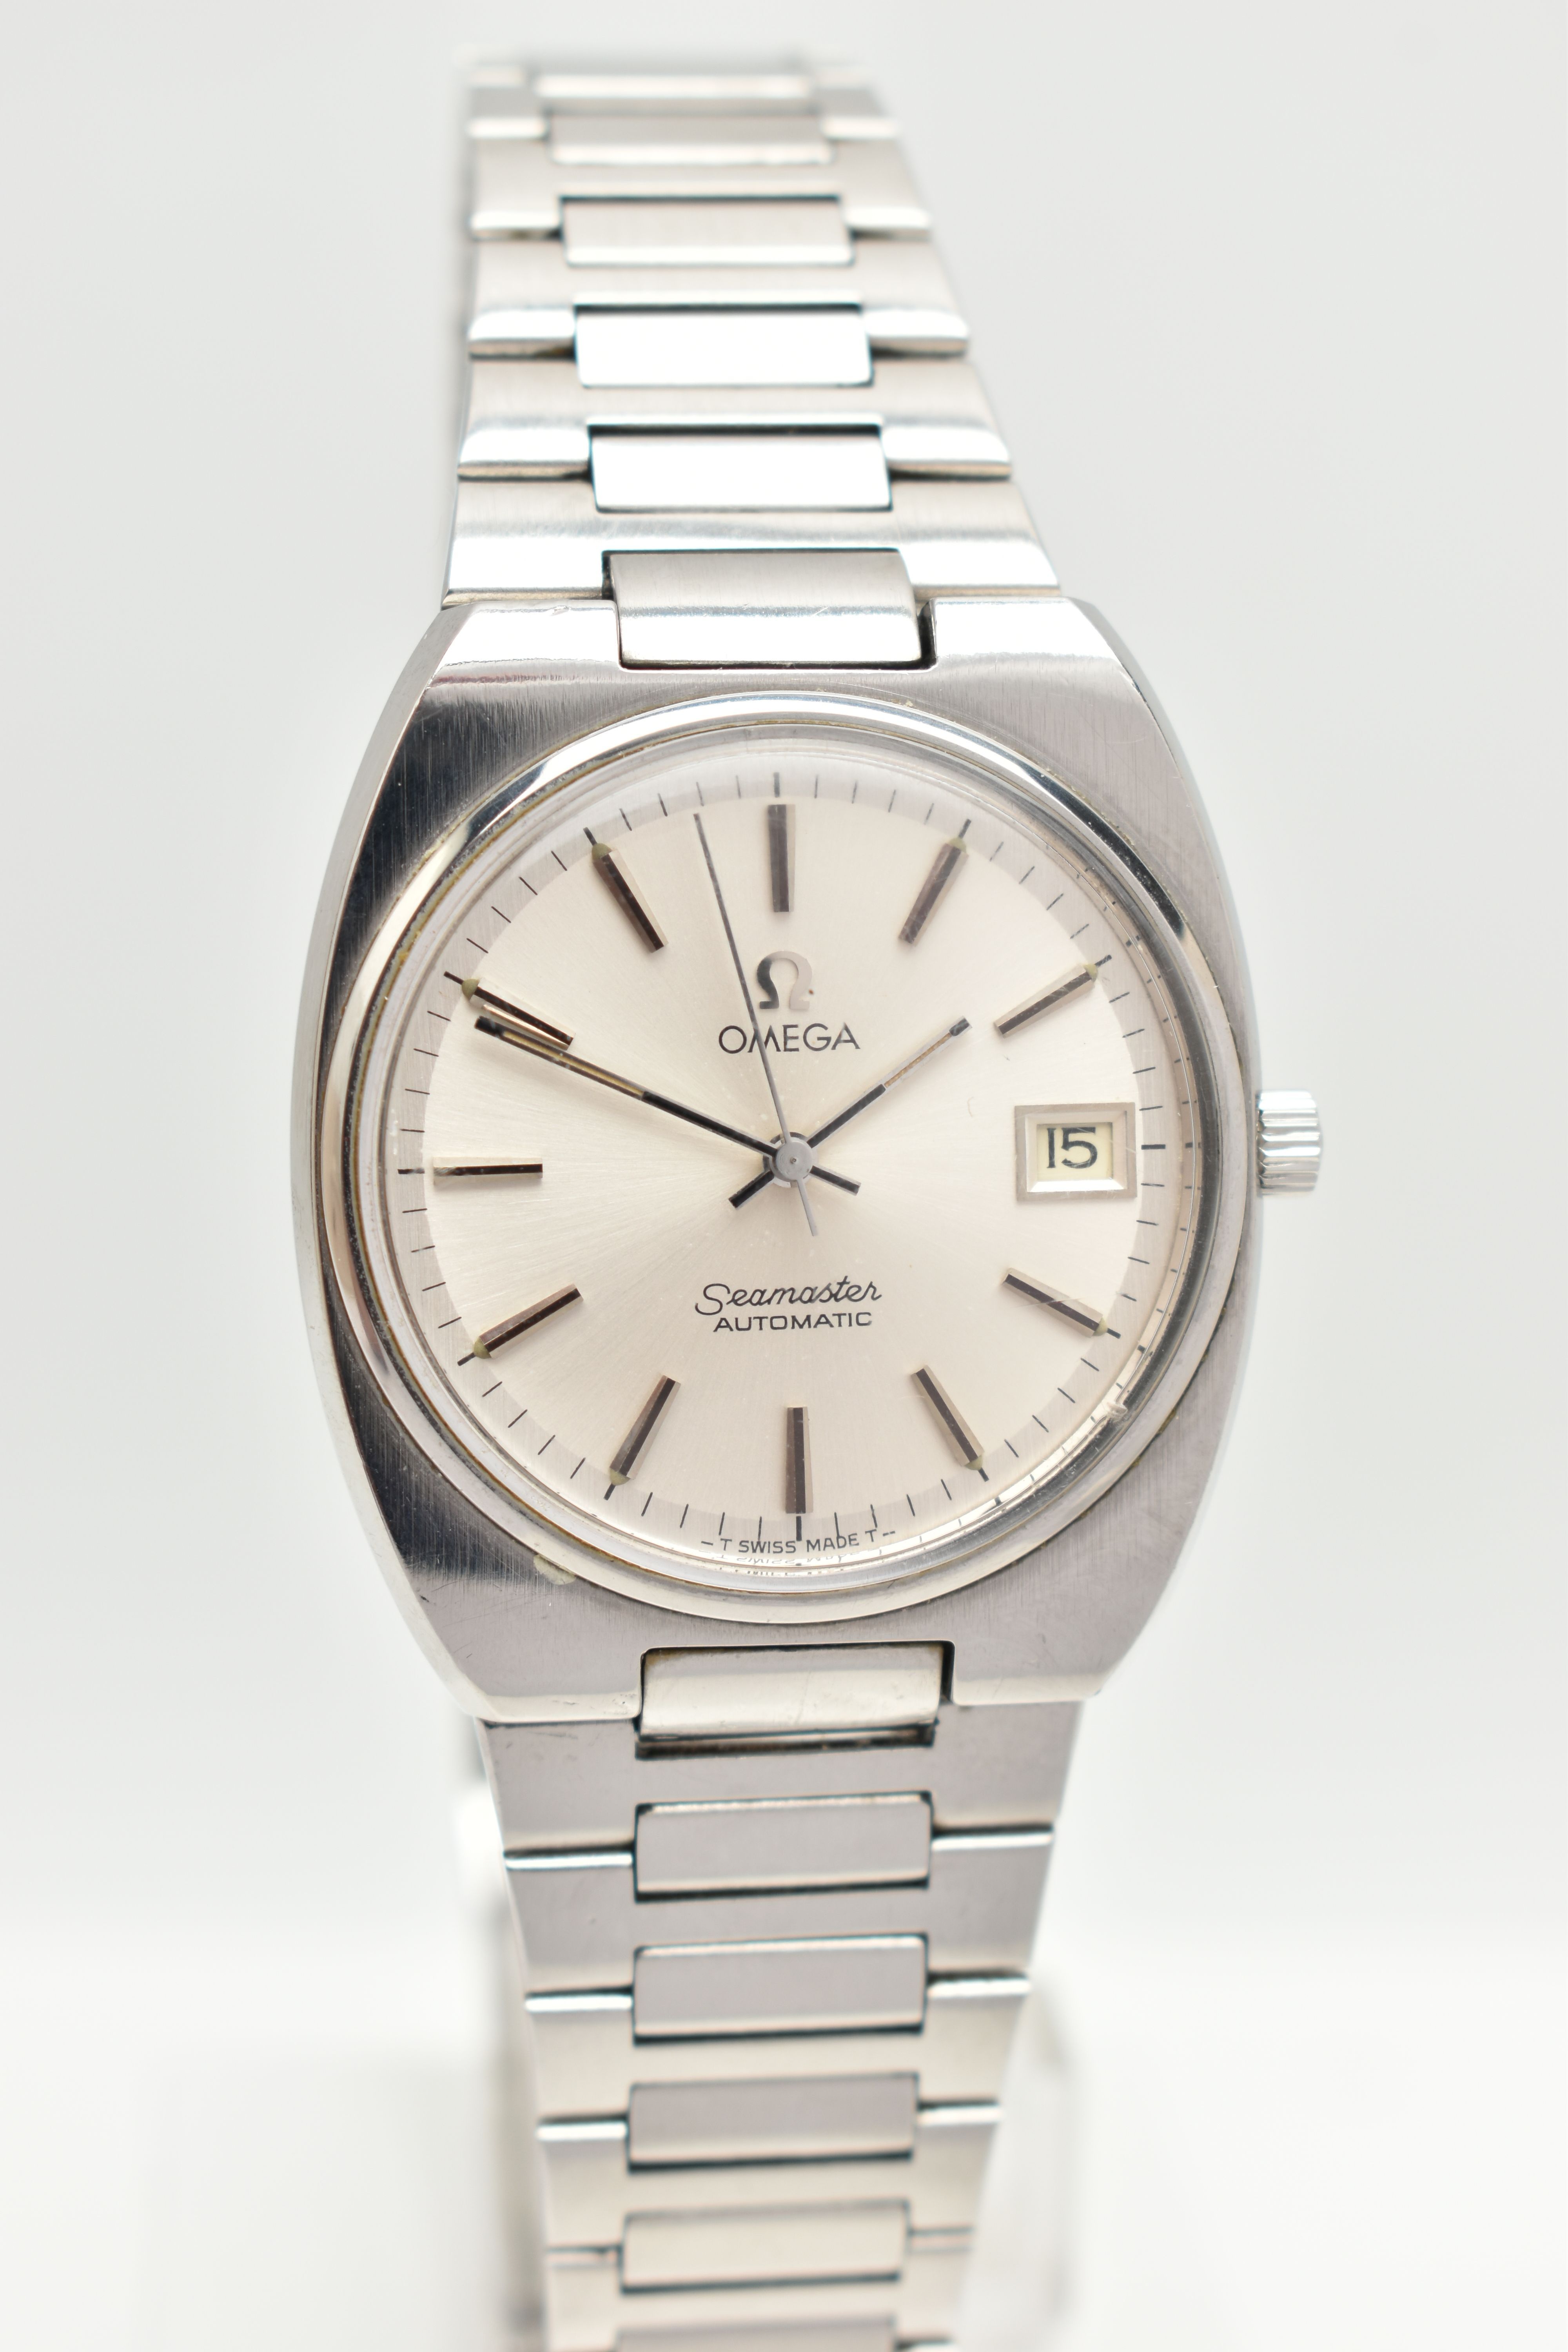 AN 'OMEGA' SEAMASTER WRISTWATCH, automatic movement, round silver tone dial signed 'Omega